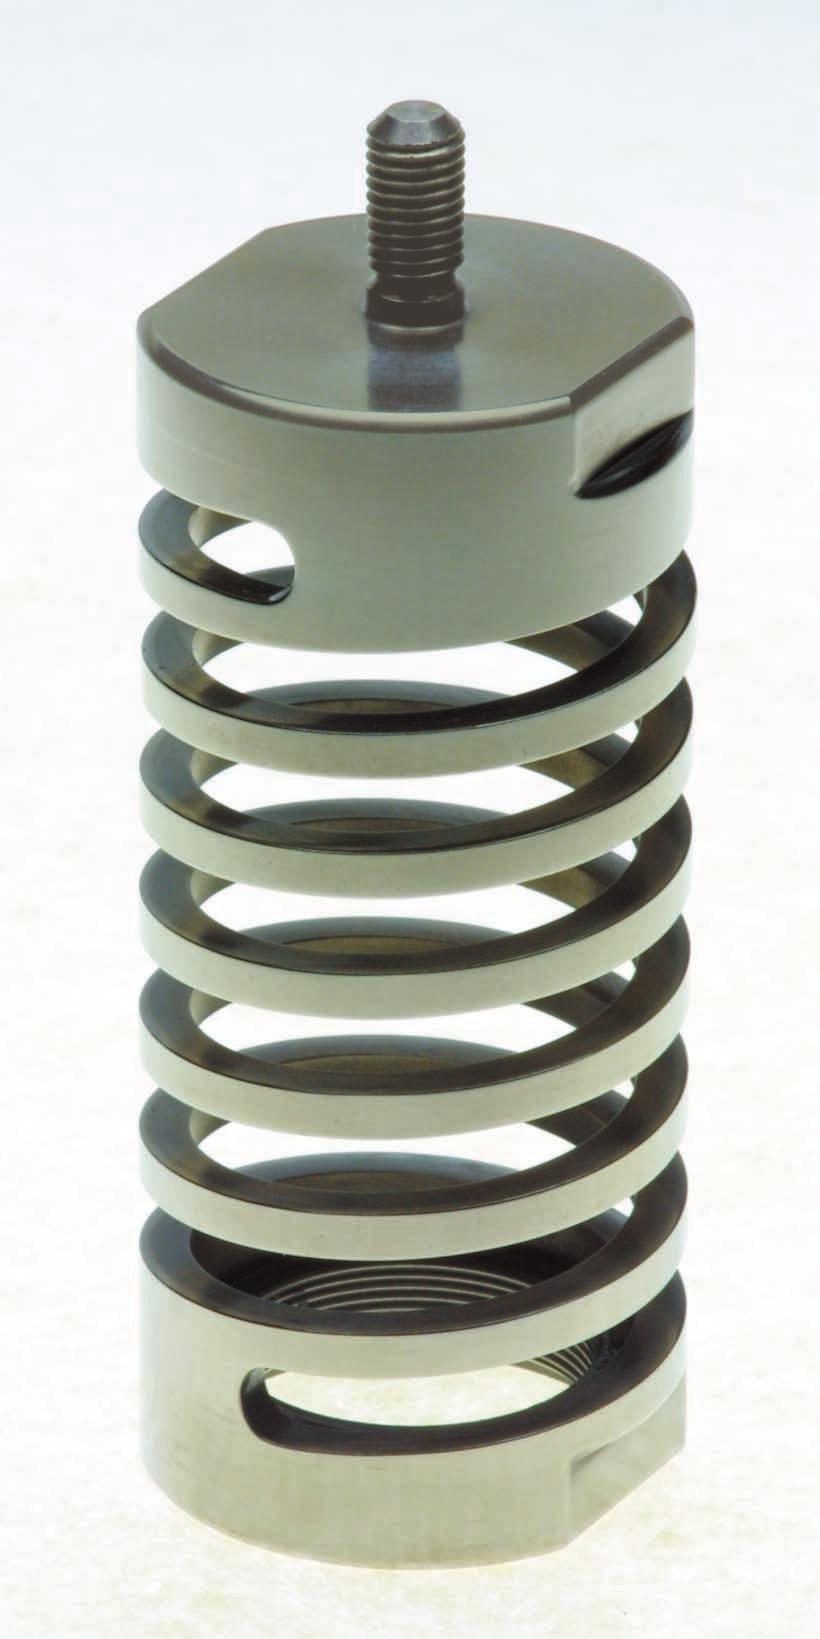 ENTER THE WORLD OF MACHINED SPRINGS The